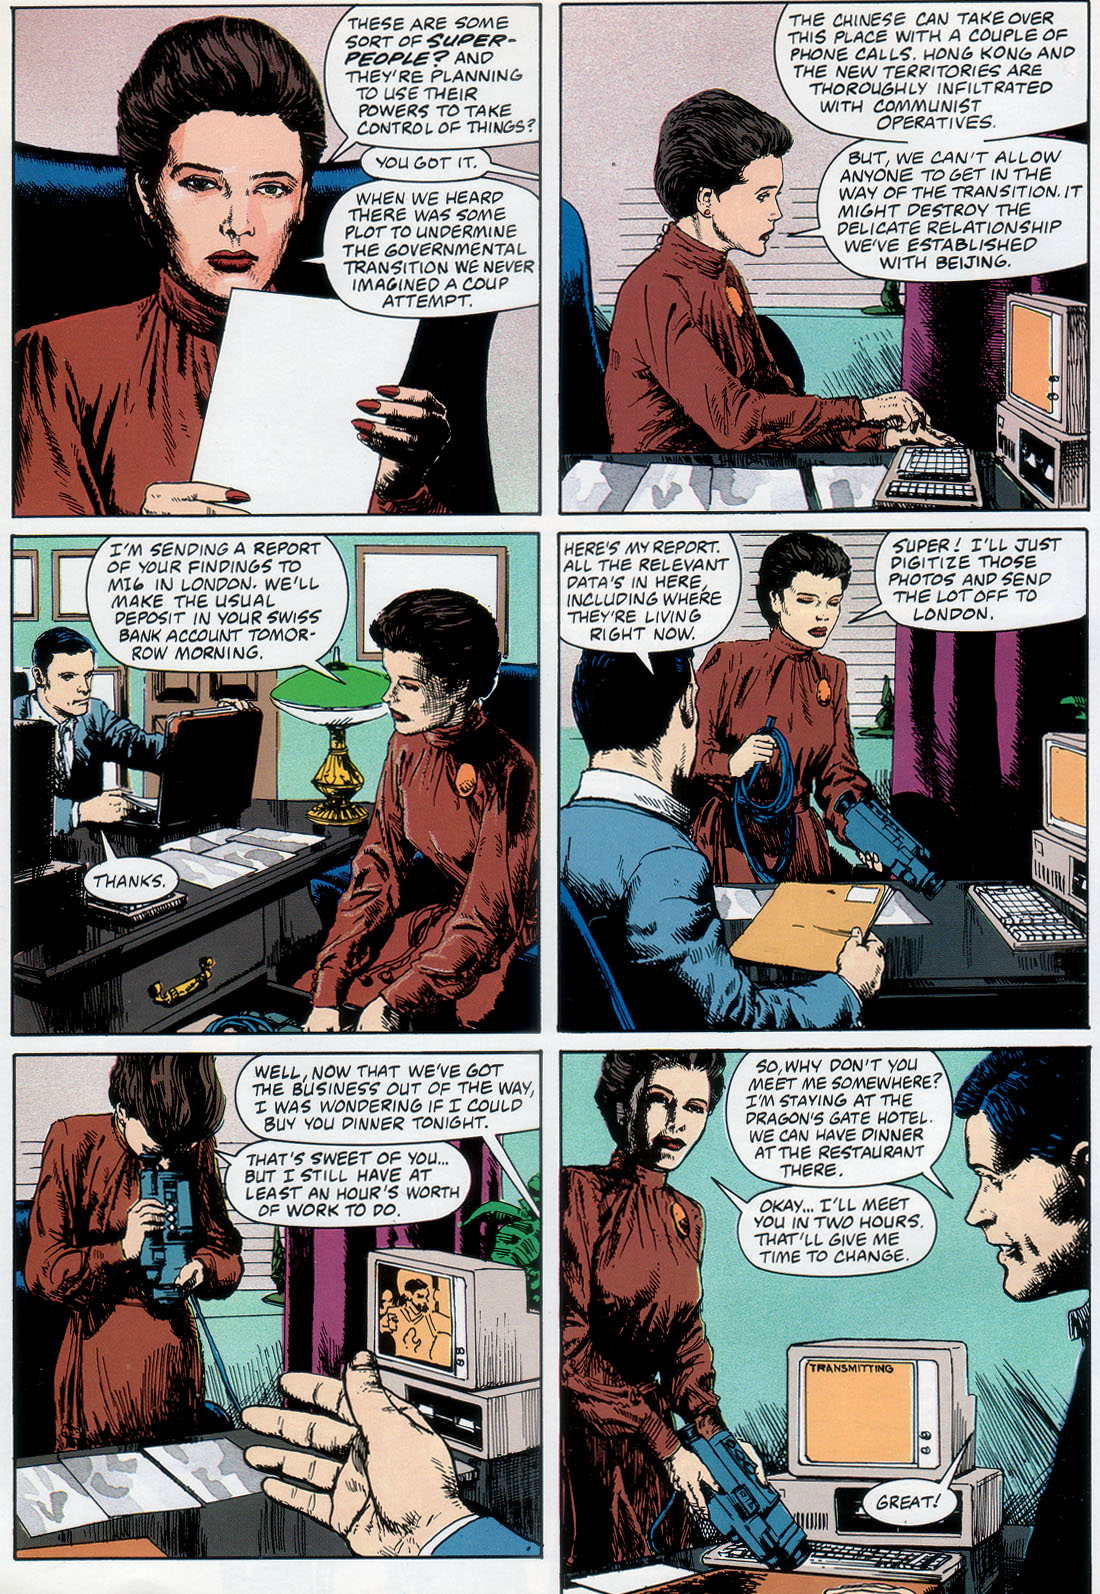 Marvel Graphic Novel issue 57 - Rick Mason - The Agent - Page 12